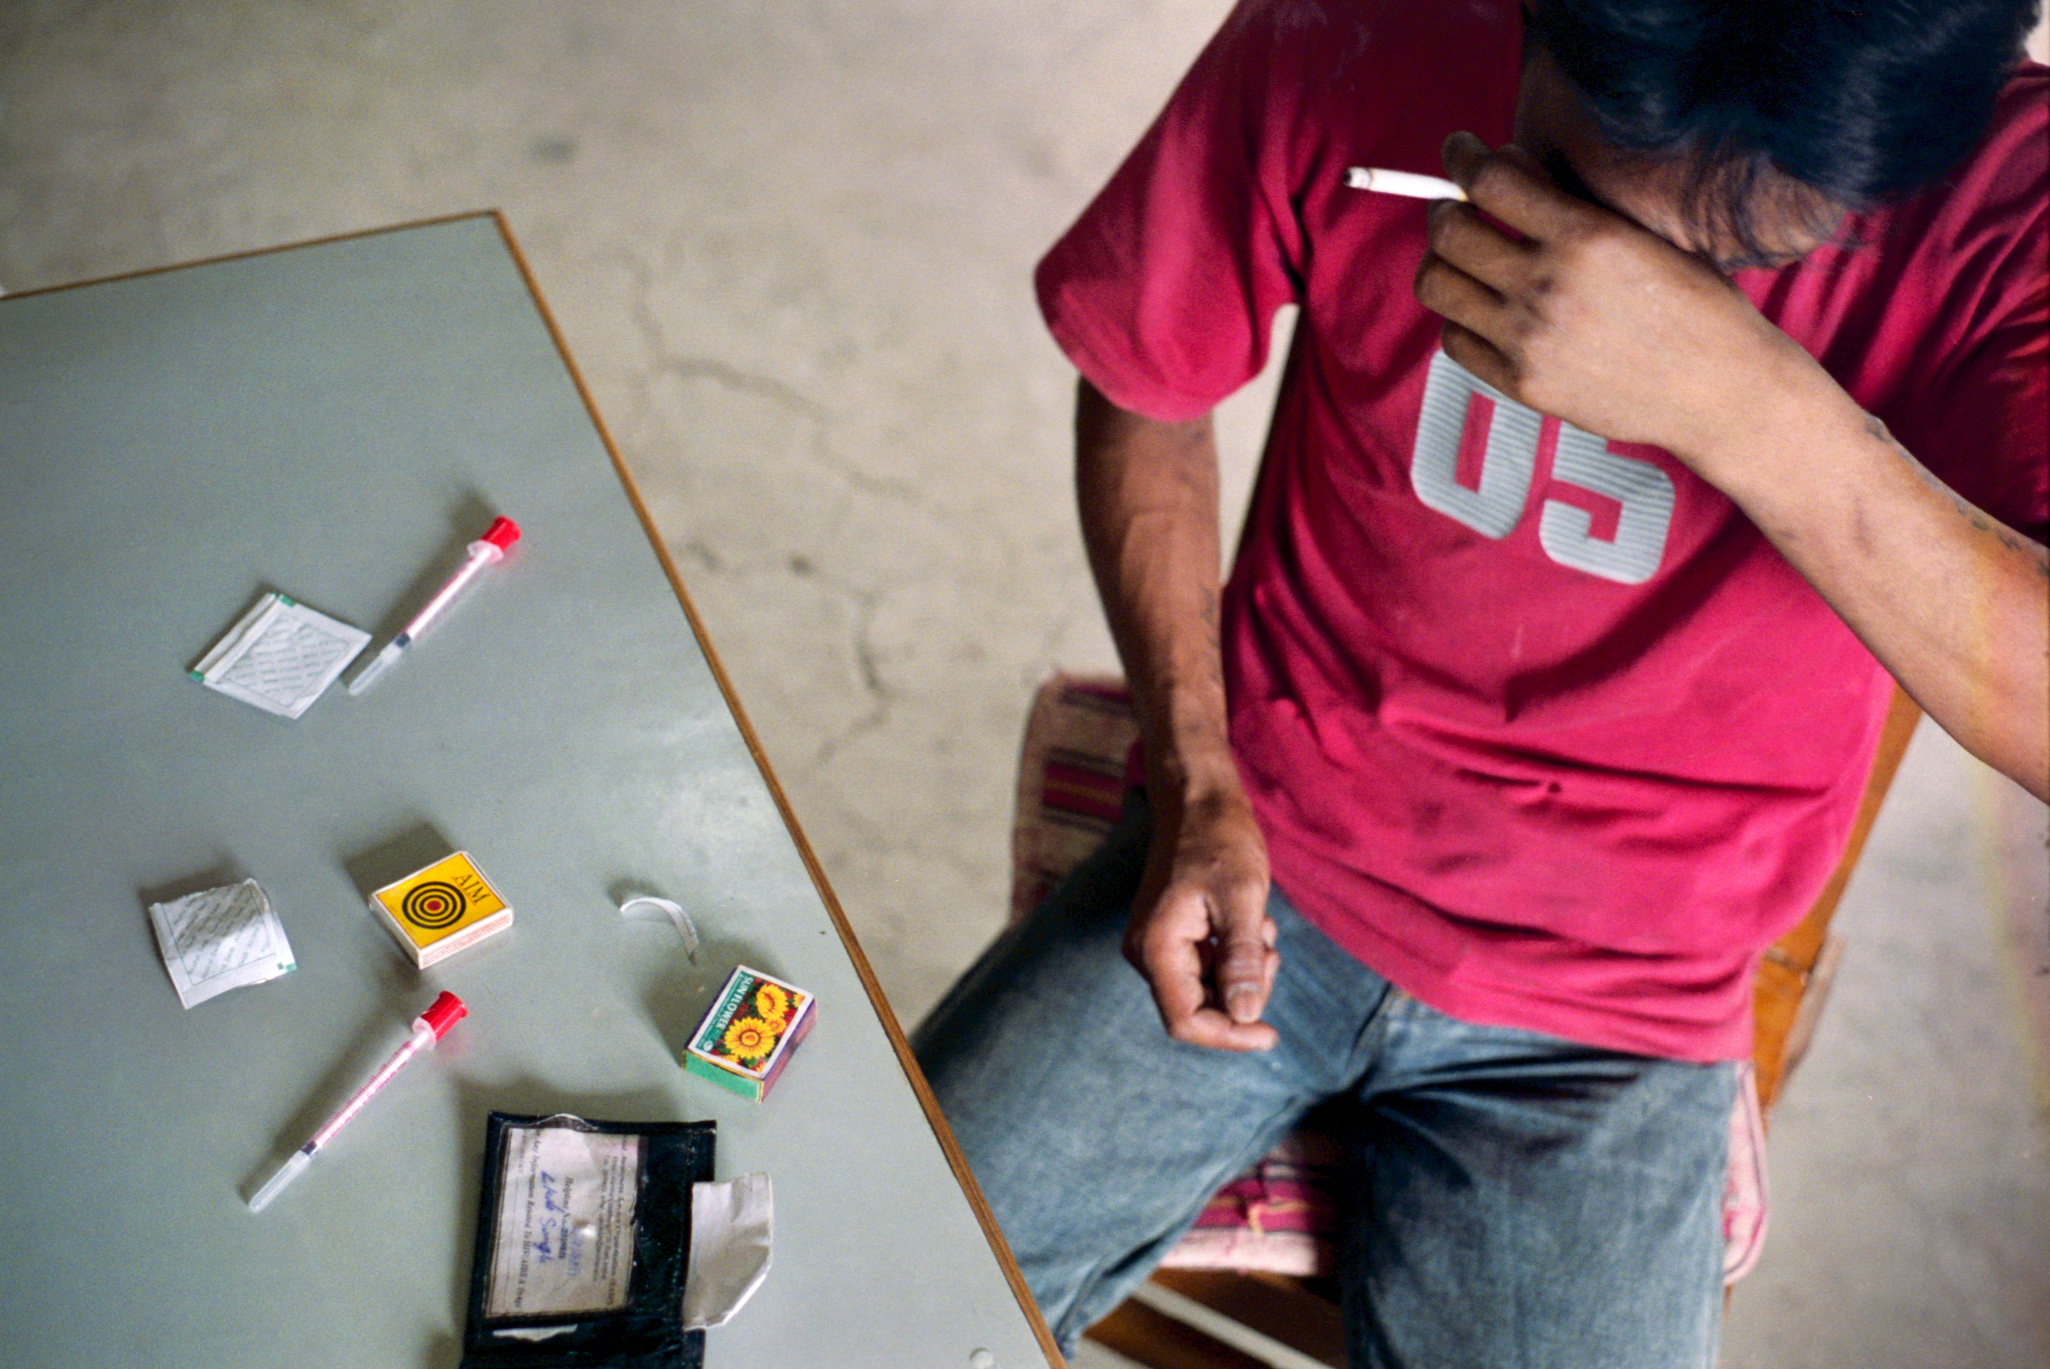  Heroin and needle use is common in NE India which borders Burma and is a major drug route. &nbsp;HIV levels in this area are some of the highest in the country. &nbsp;Many social service organizations have begun needle exchange programs to reduce th